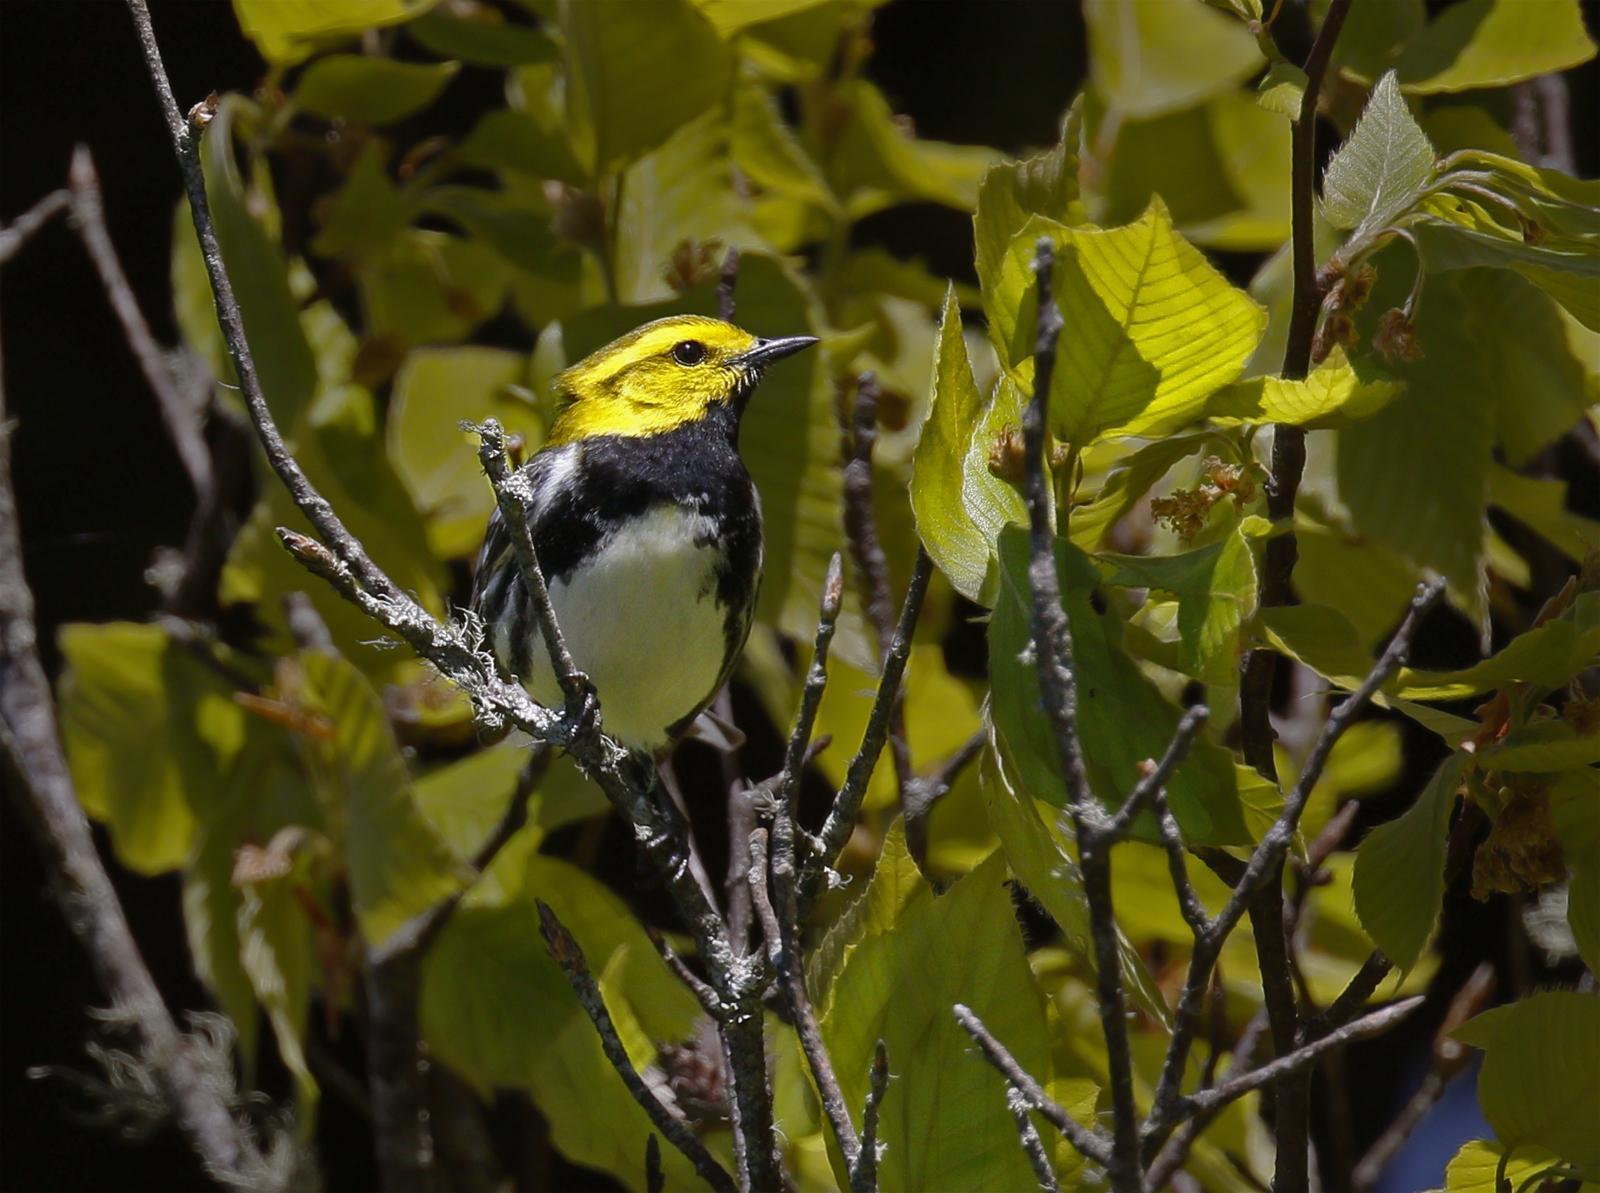 Black-throated Green Warbler Photo by Emily Willoughby